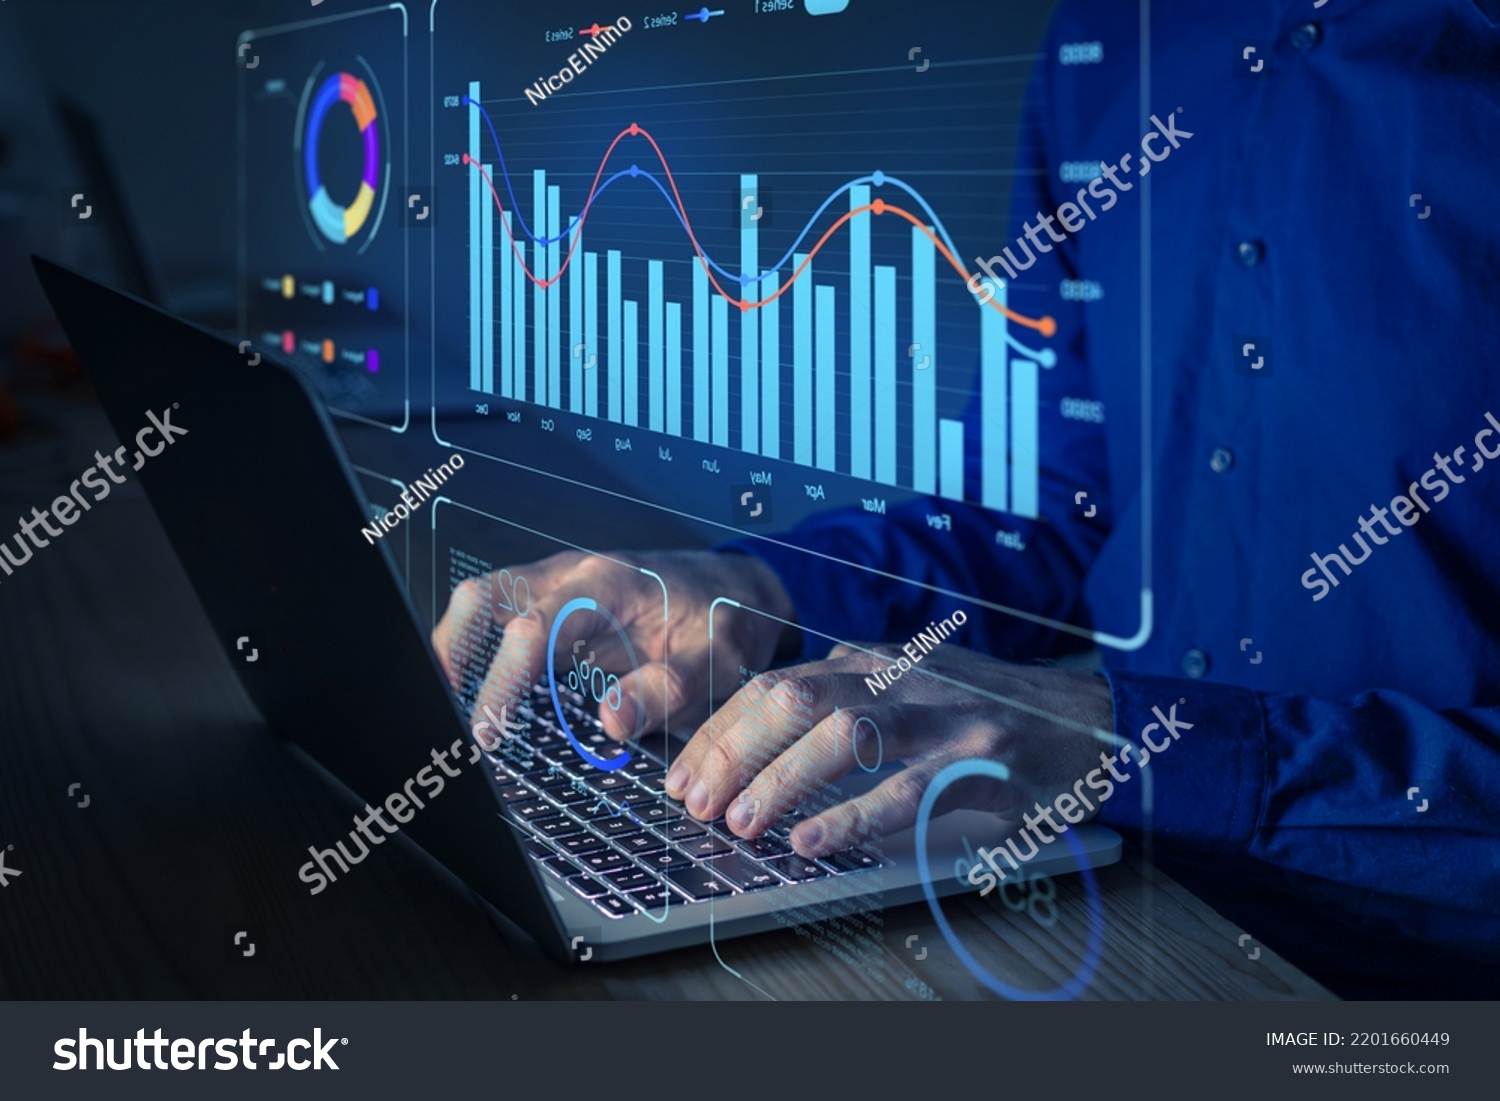 Data analyst working on business analytics dashboard with charts, metrics and KPI to analyze performance and create insight reports for operations management. #2201660449